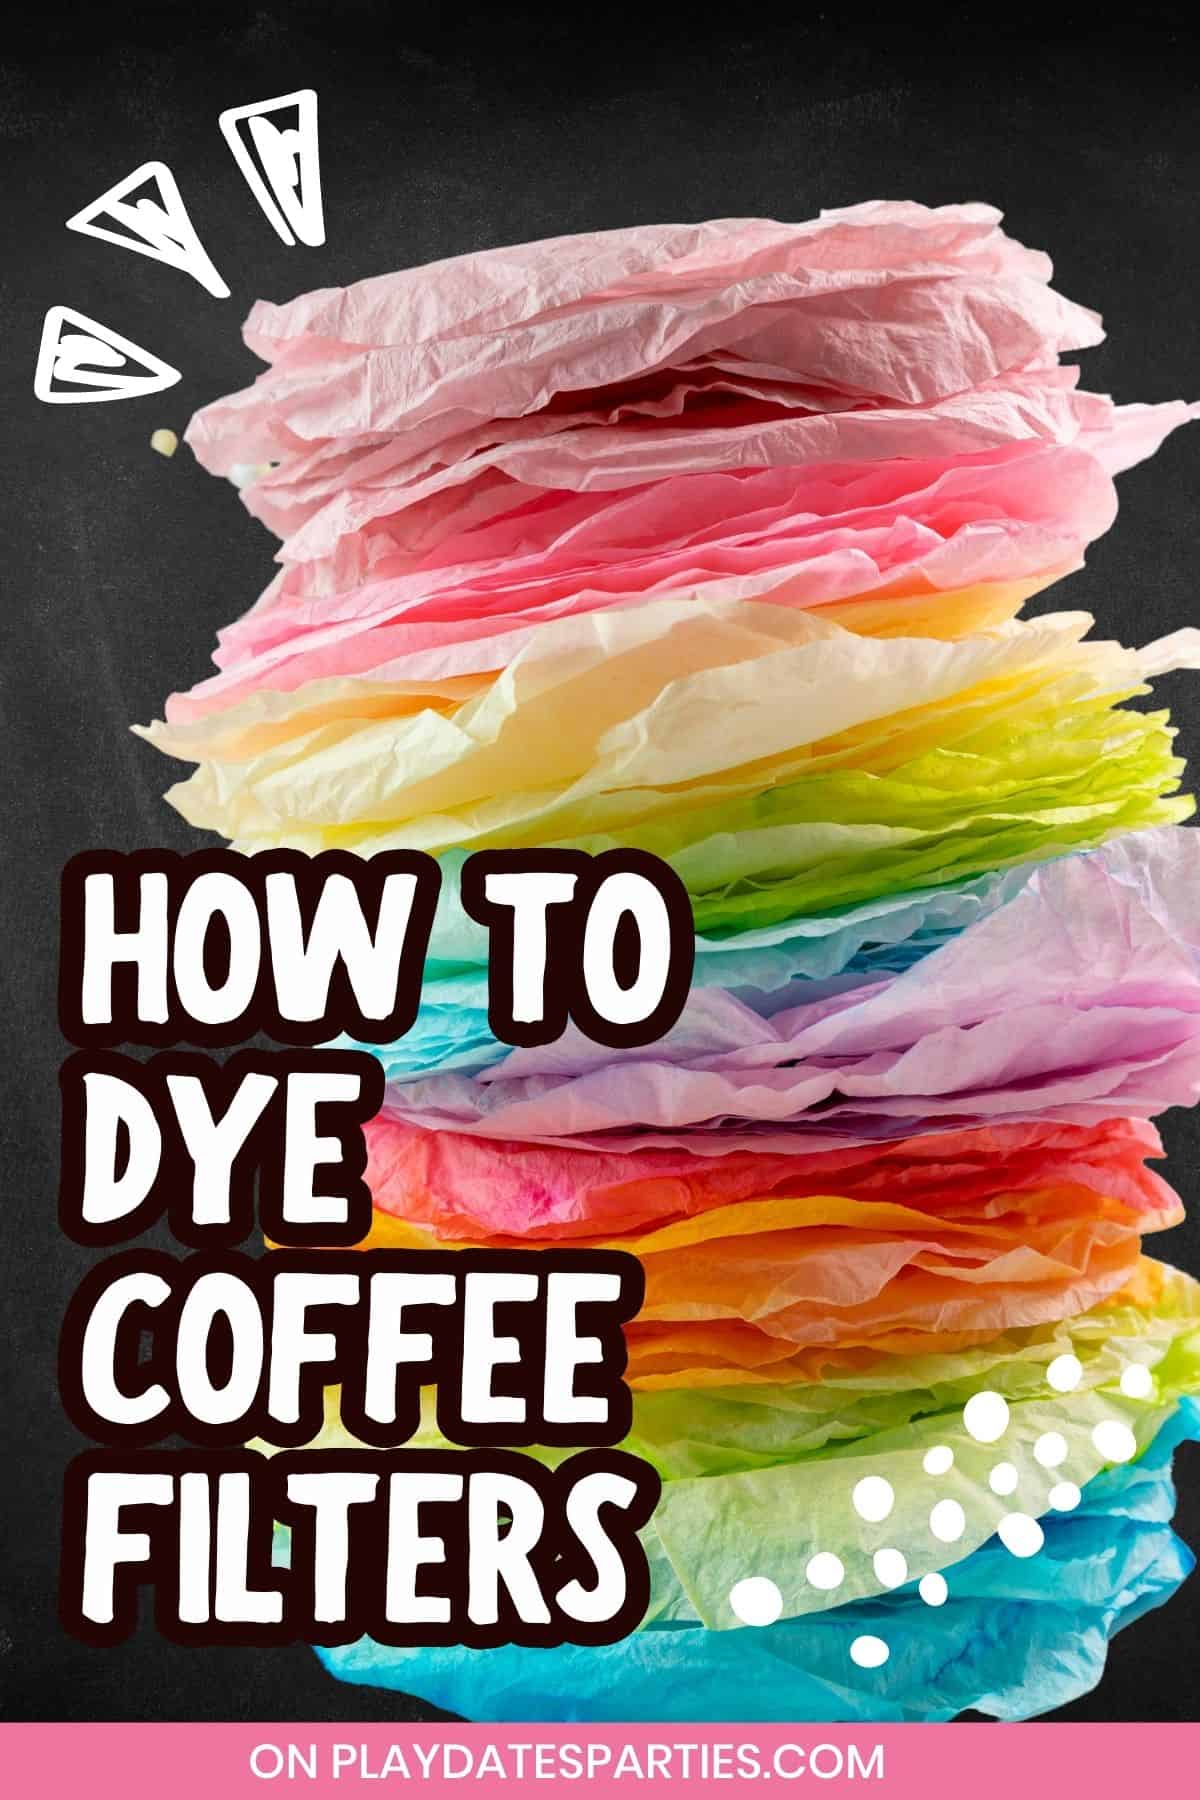 How to dye coffee filters Pin image.